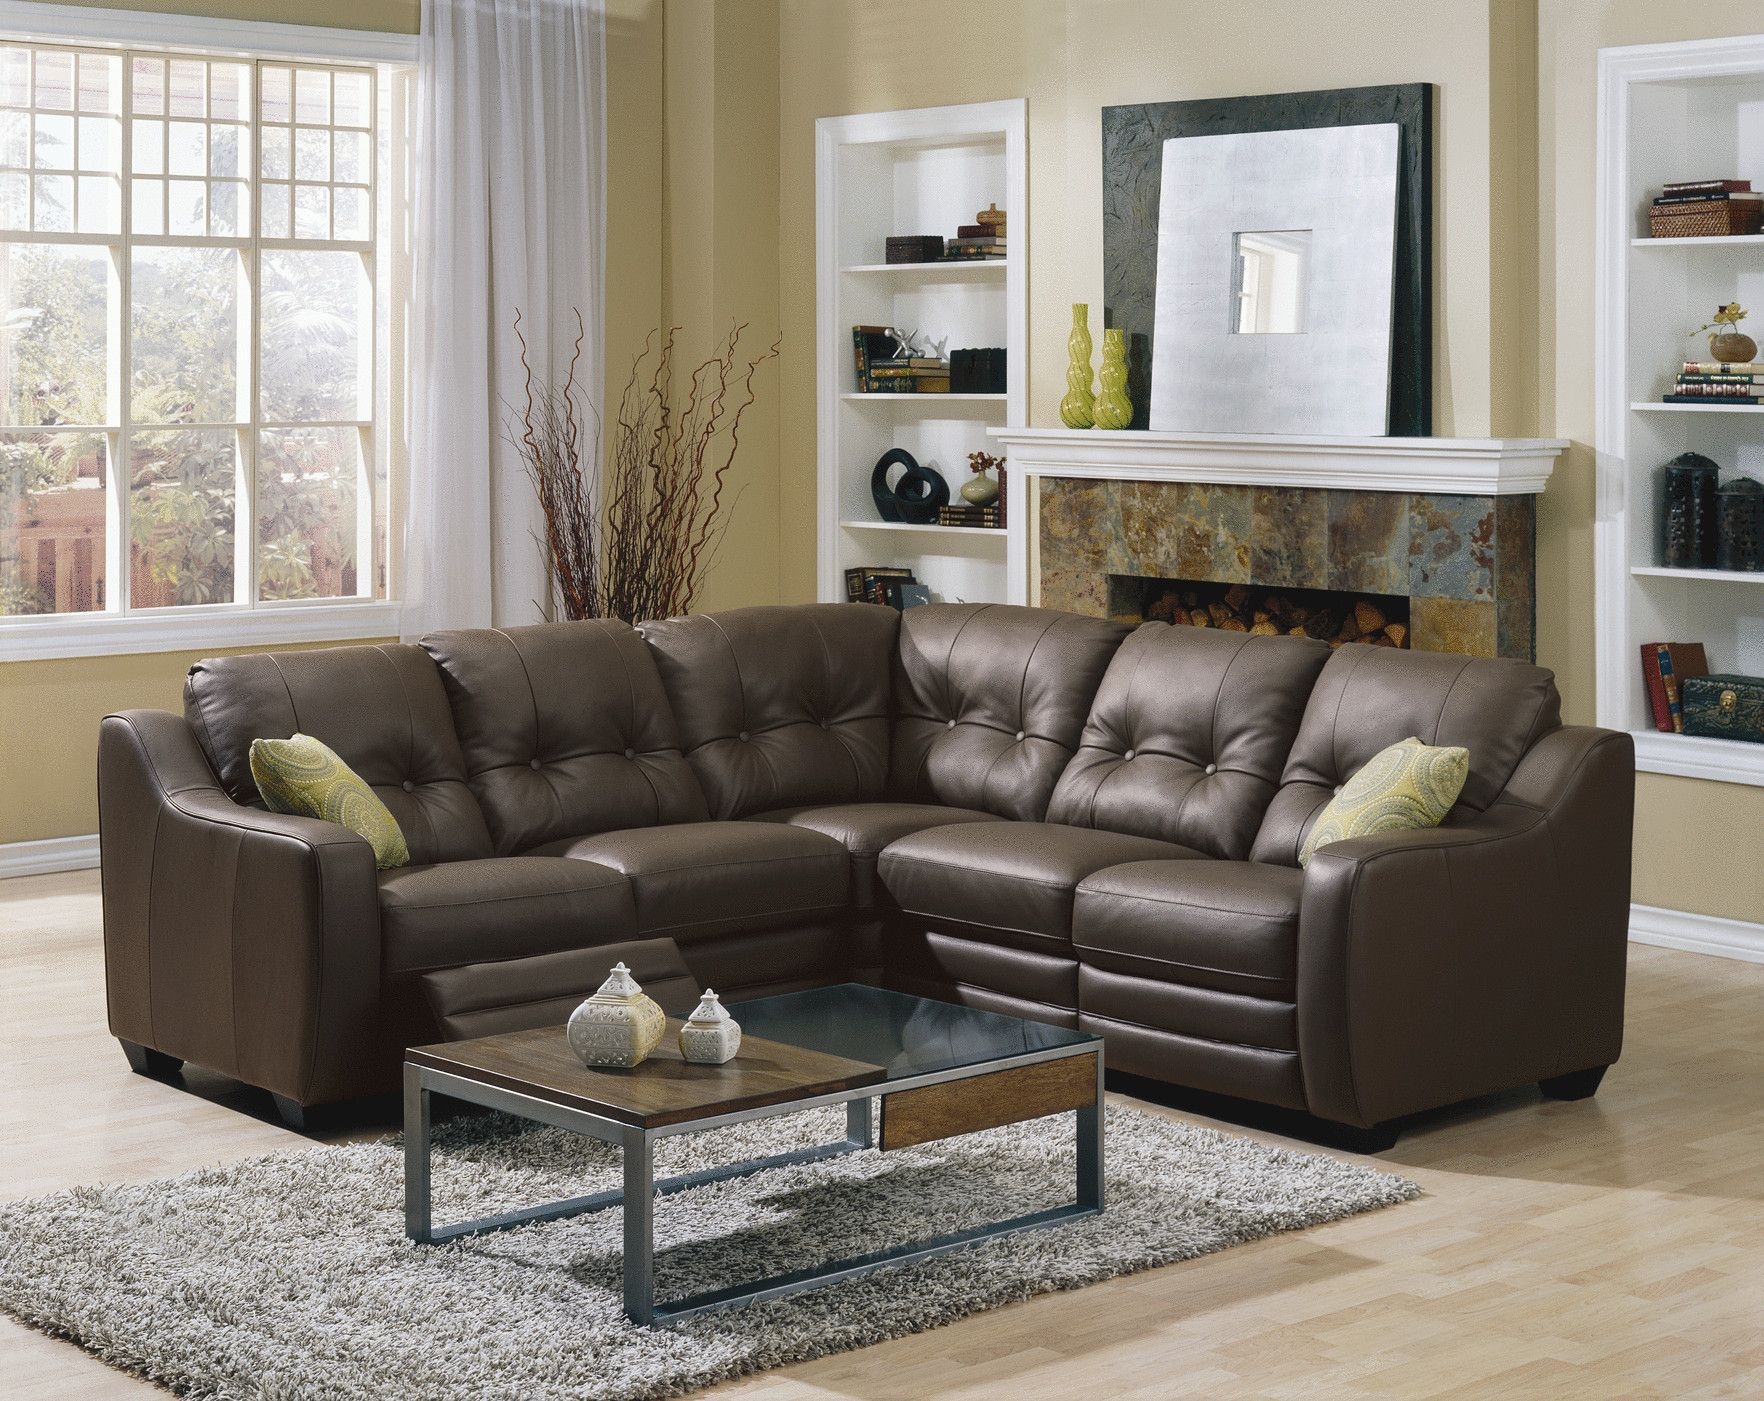 Small Sectional Sofa With Recliner, Small Sectional Sofas With Recliners And Cup Holders